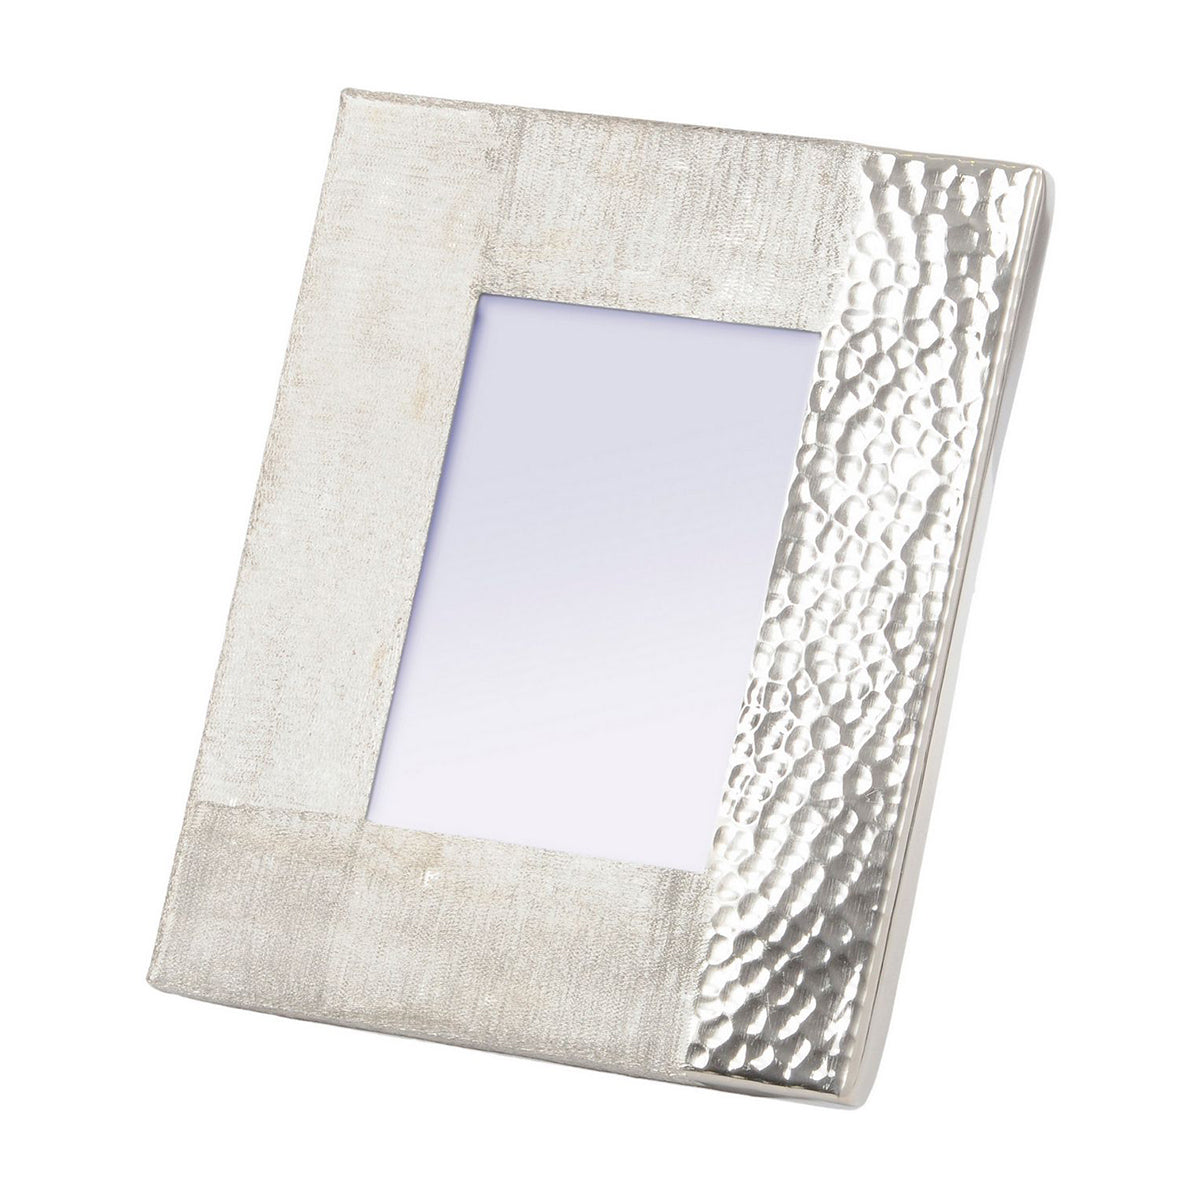 Fuse Hammered and Brushed 5X7 Inch Photo Frame in Silver Finish